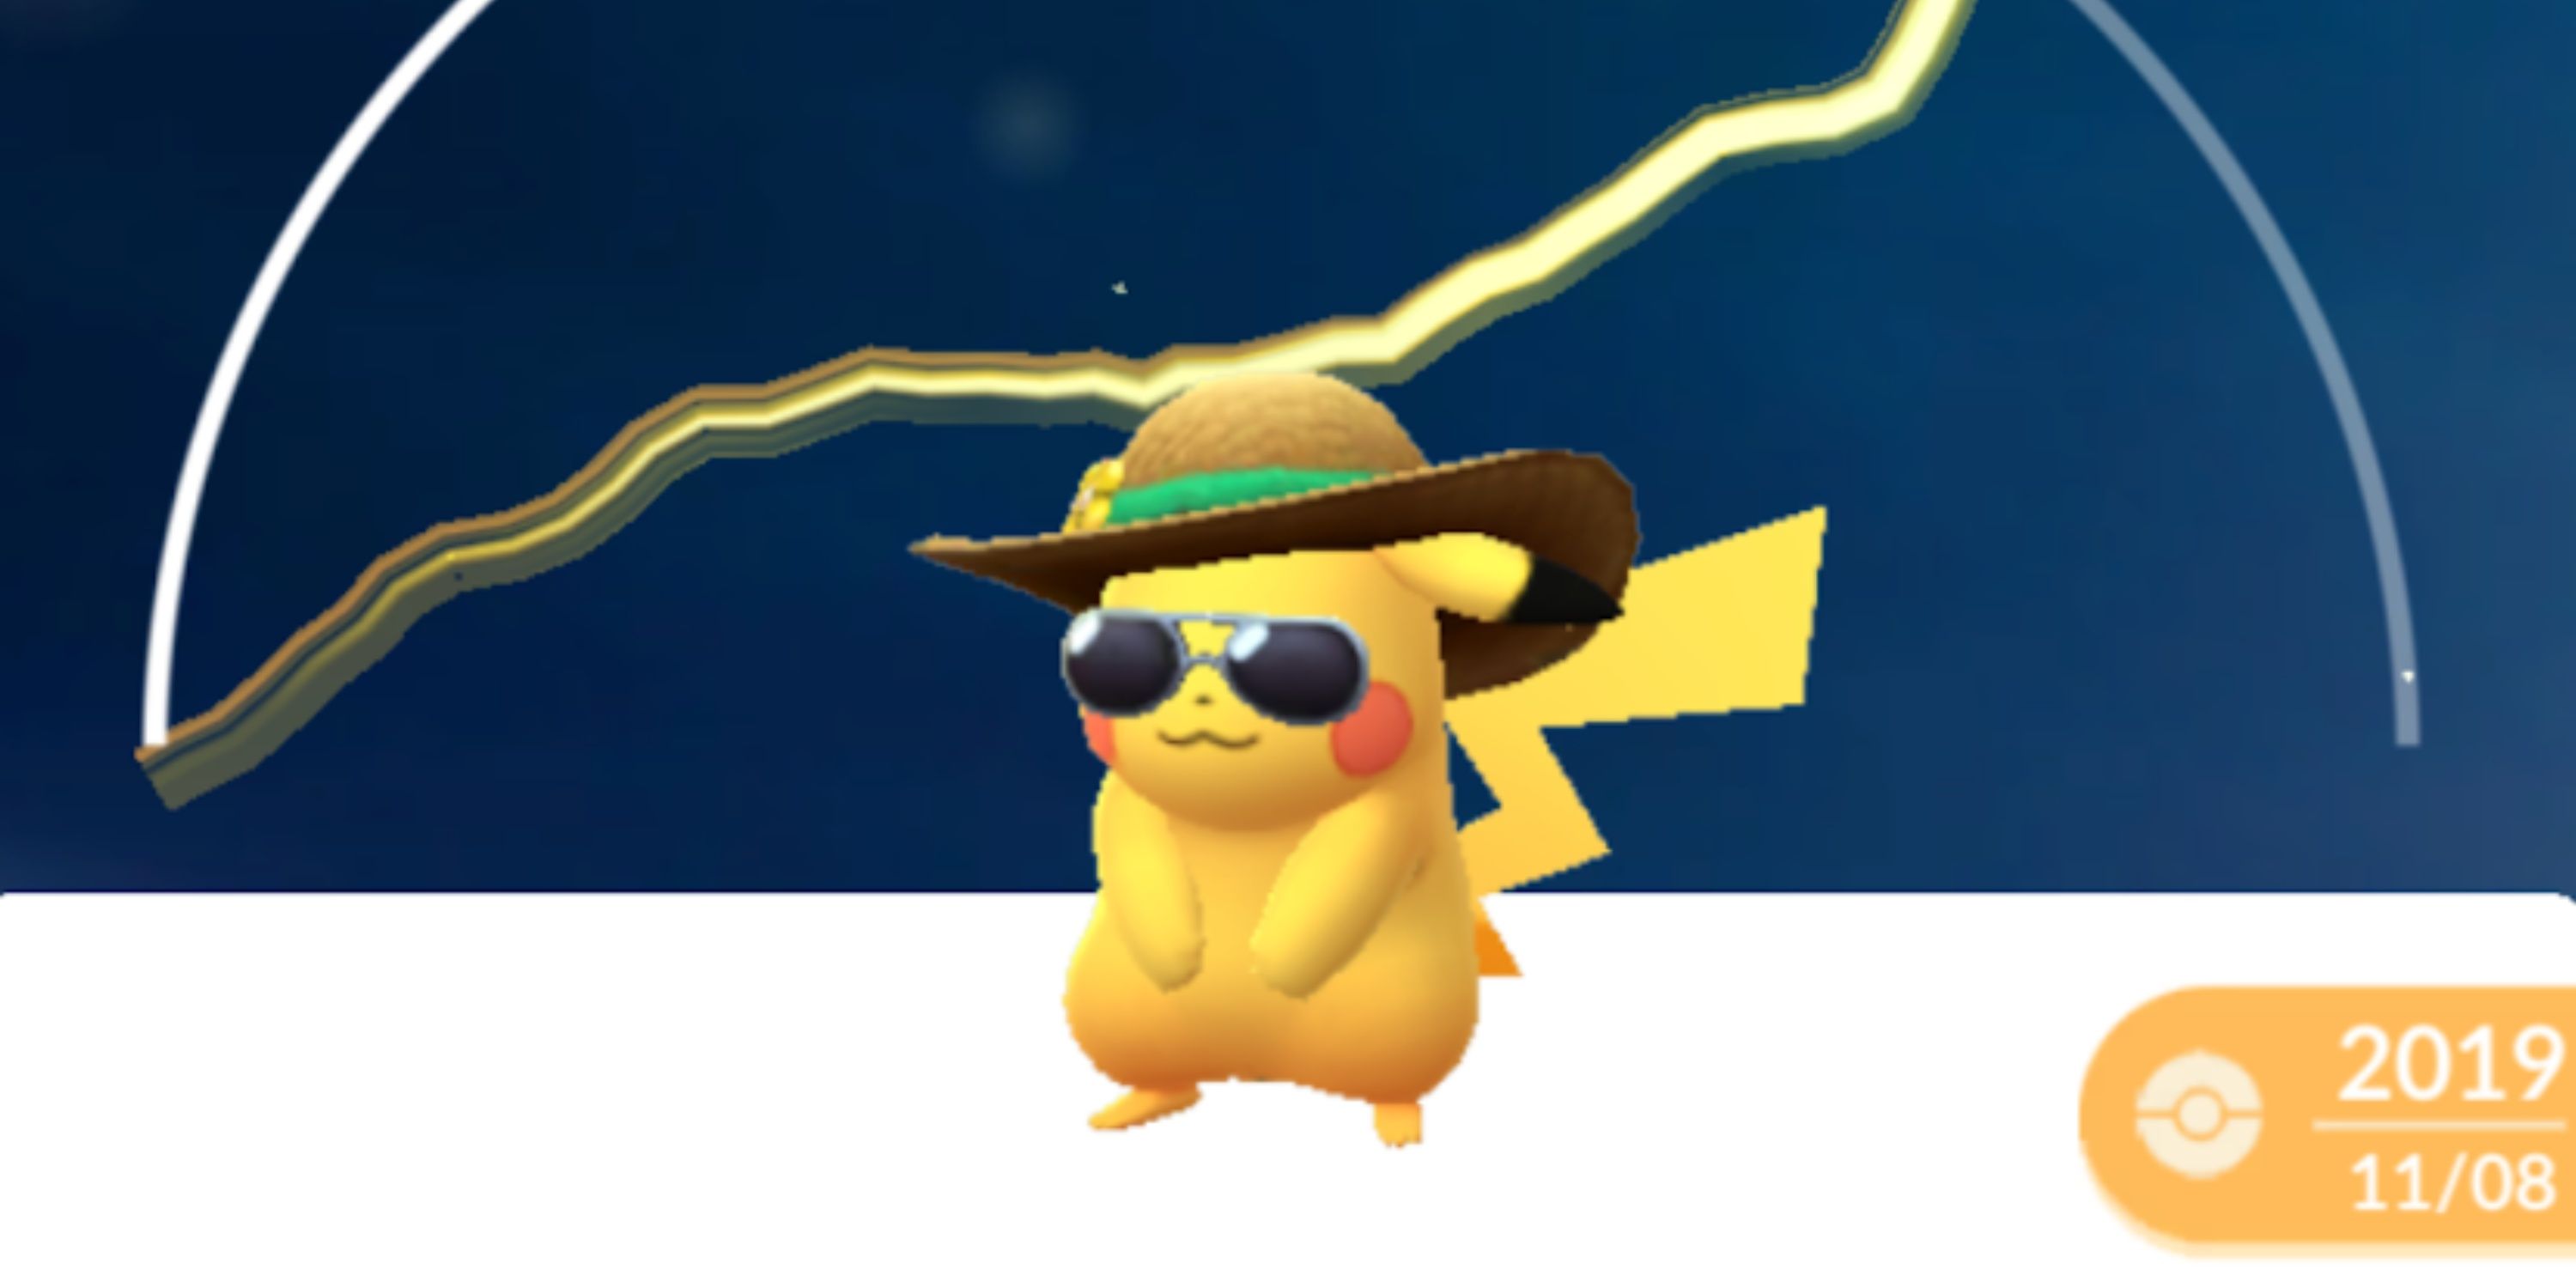 pikachu with a sun hat and sunglasses